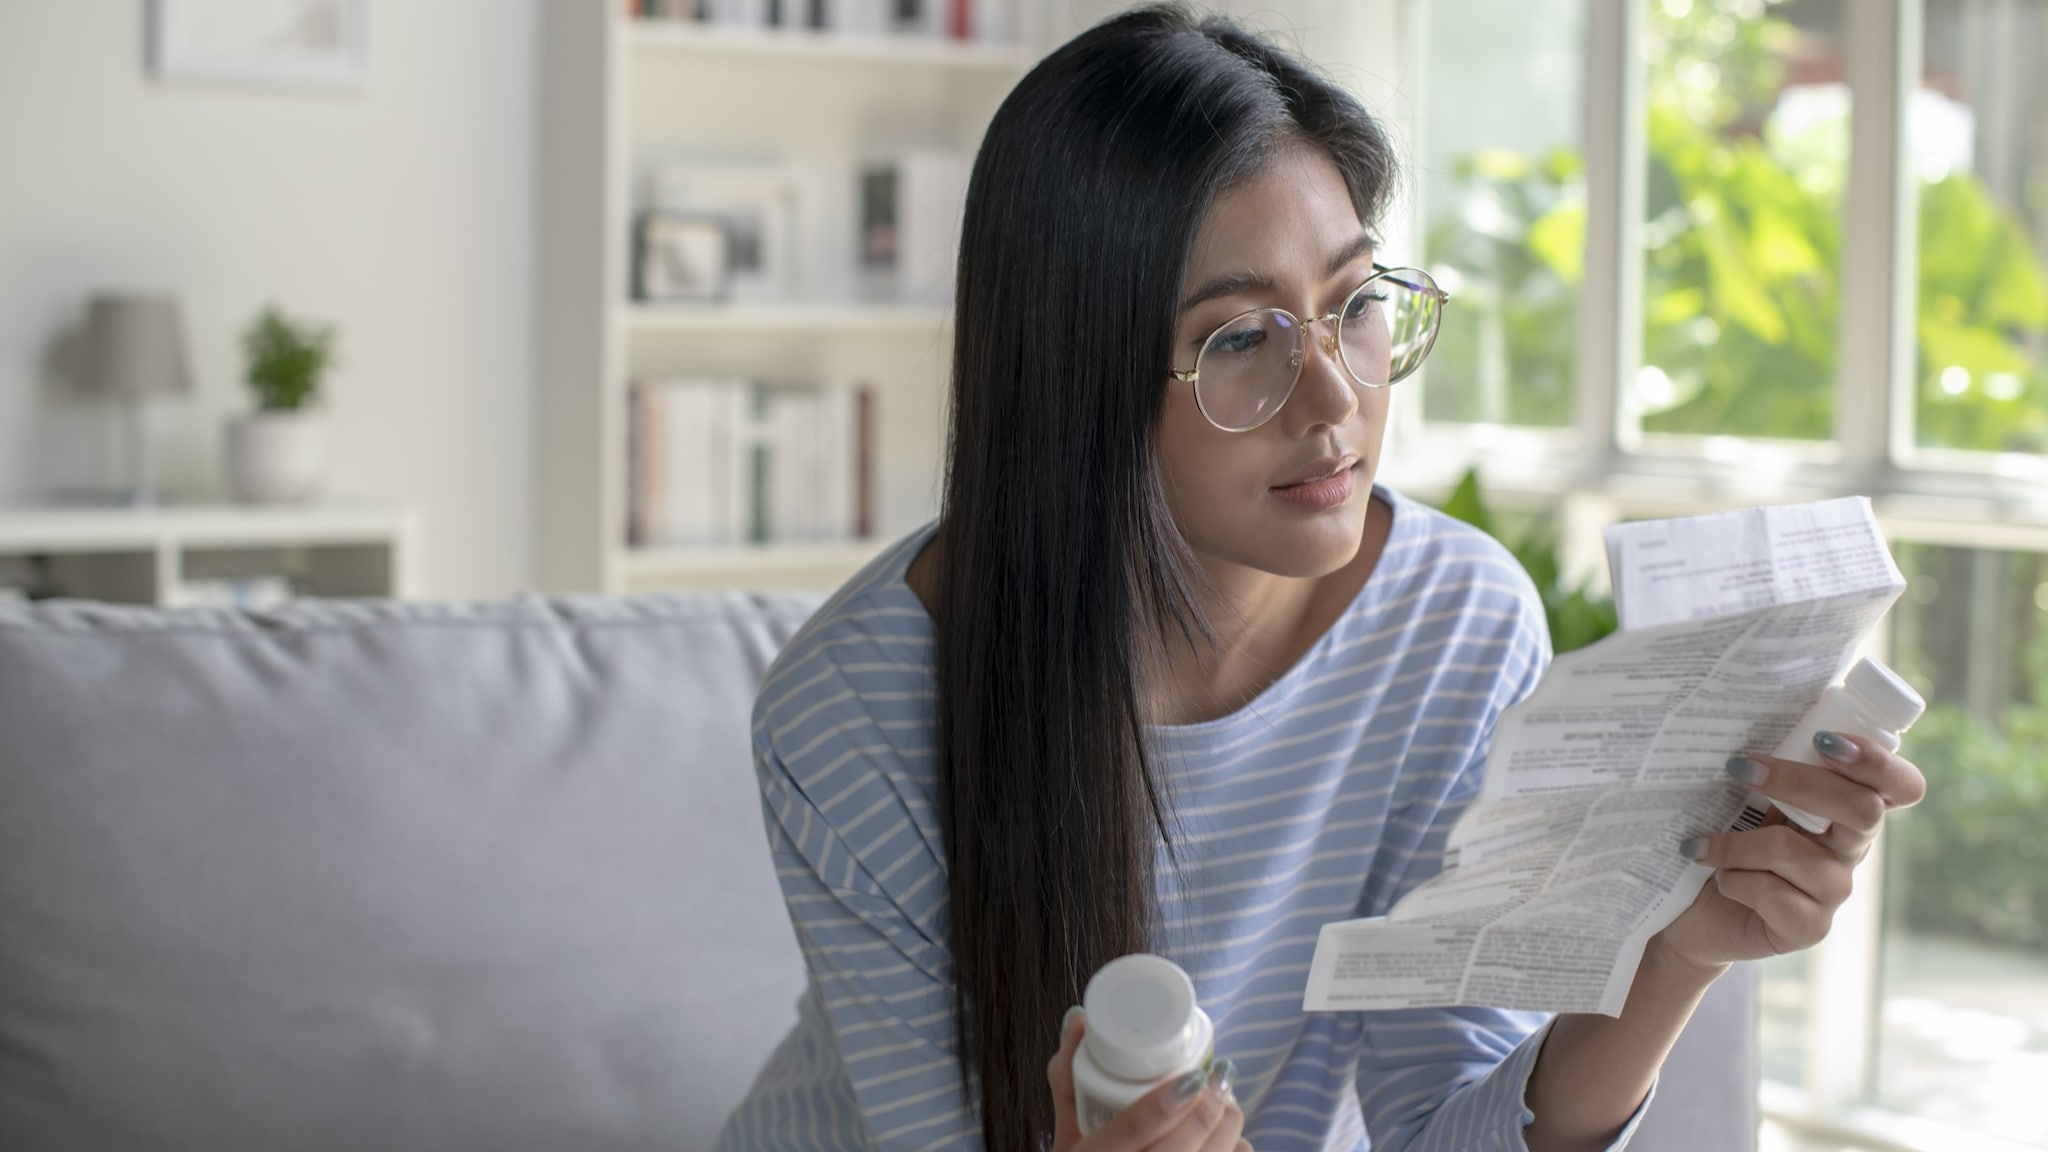 An adult with long hair and glasses is reading an information sheet in their left hand for a medication bottle in their right hand.